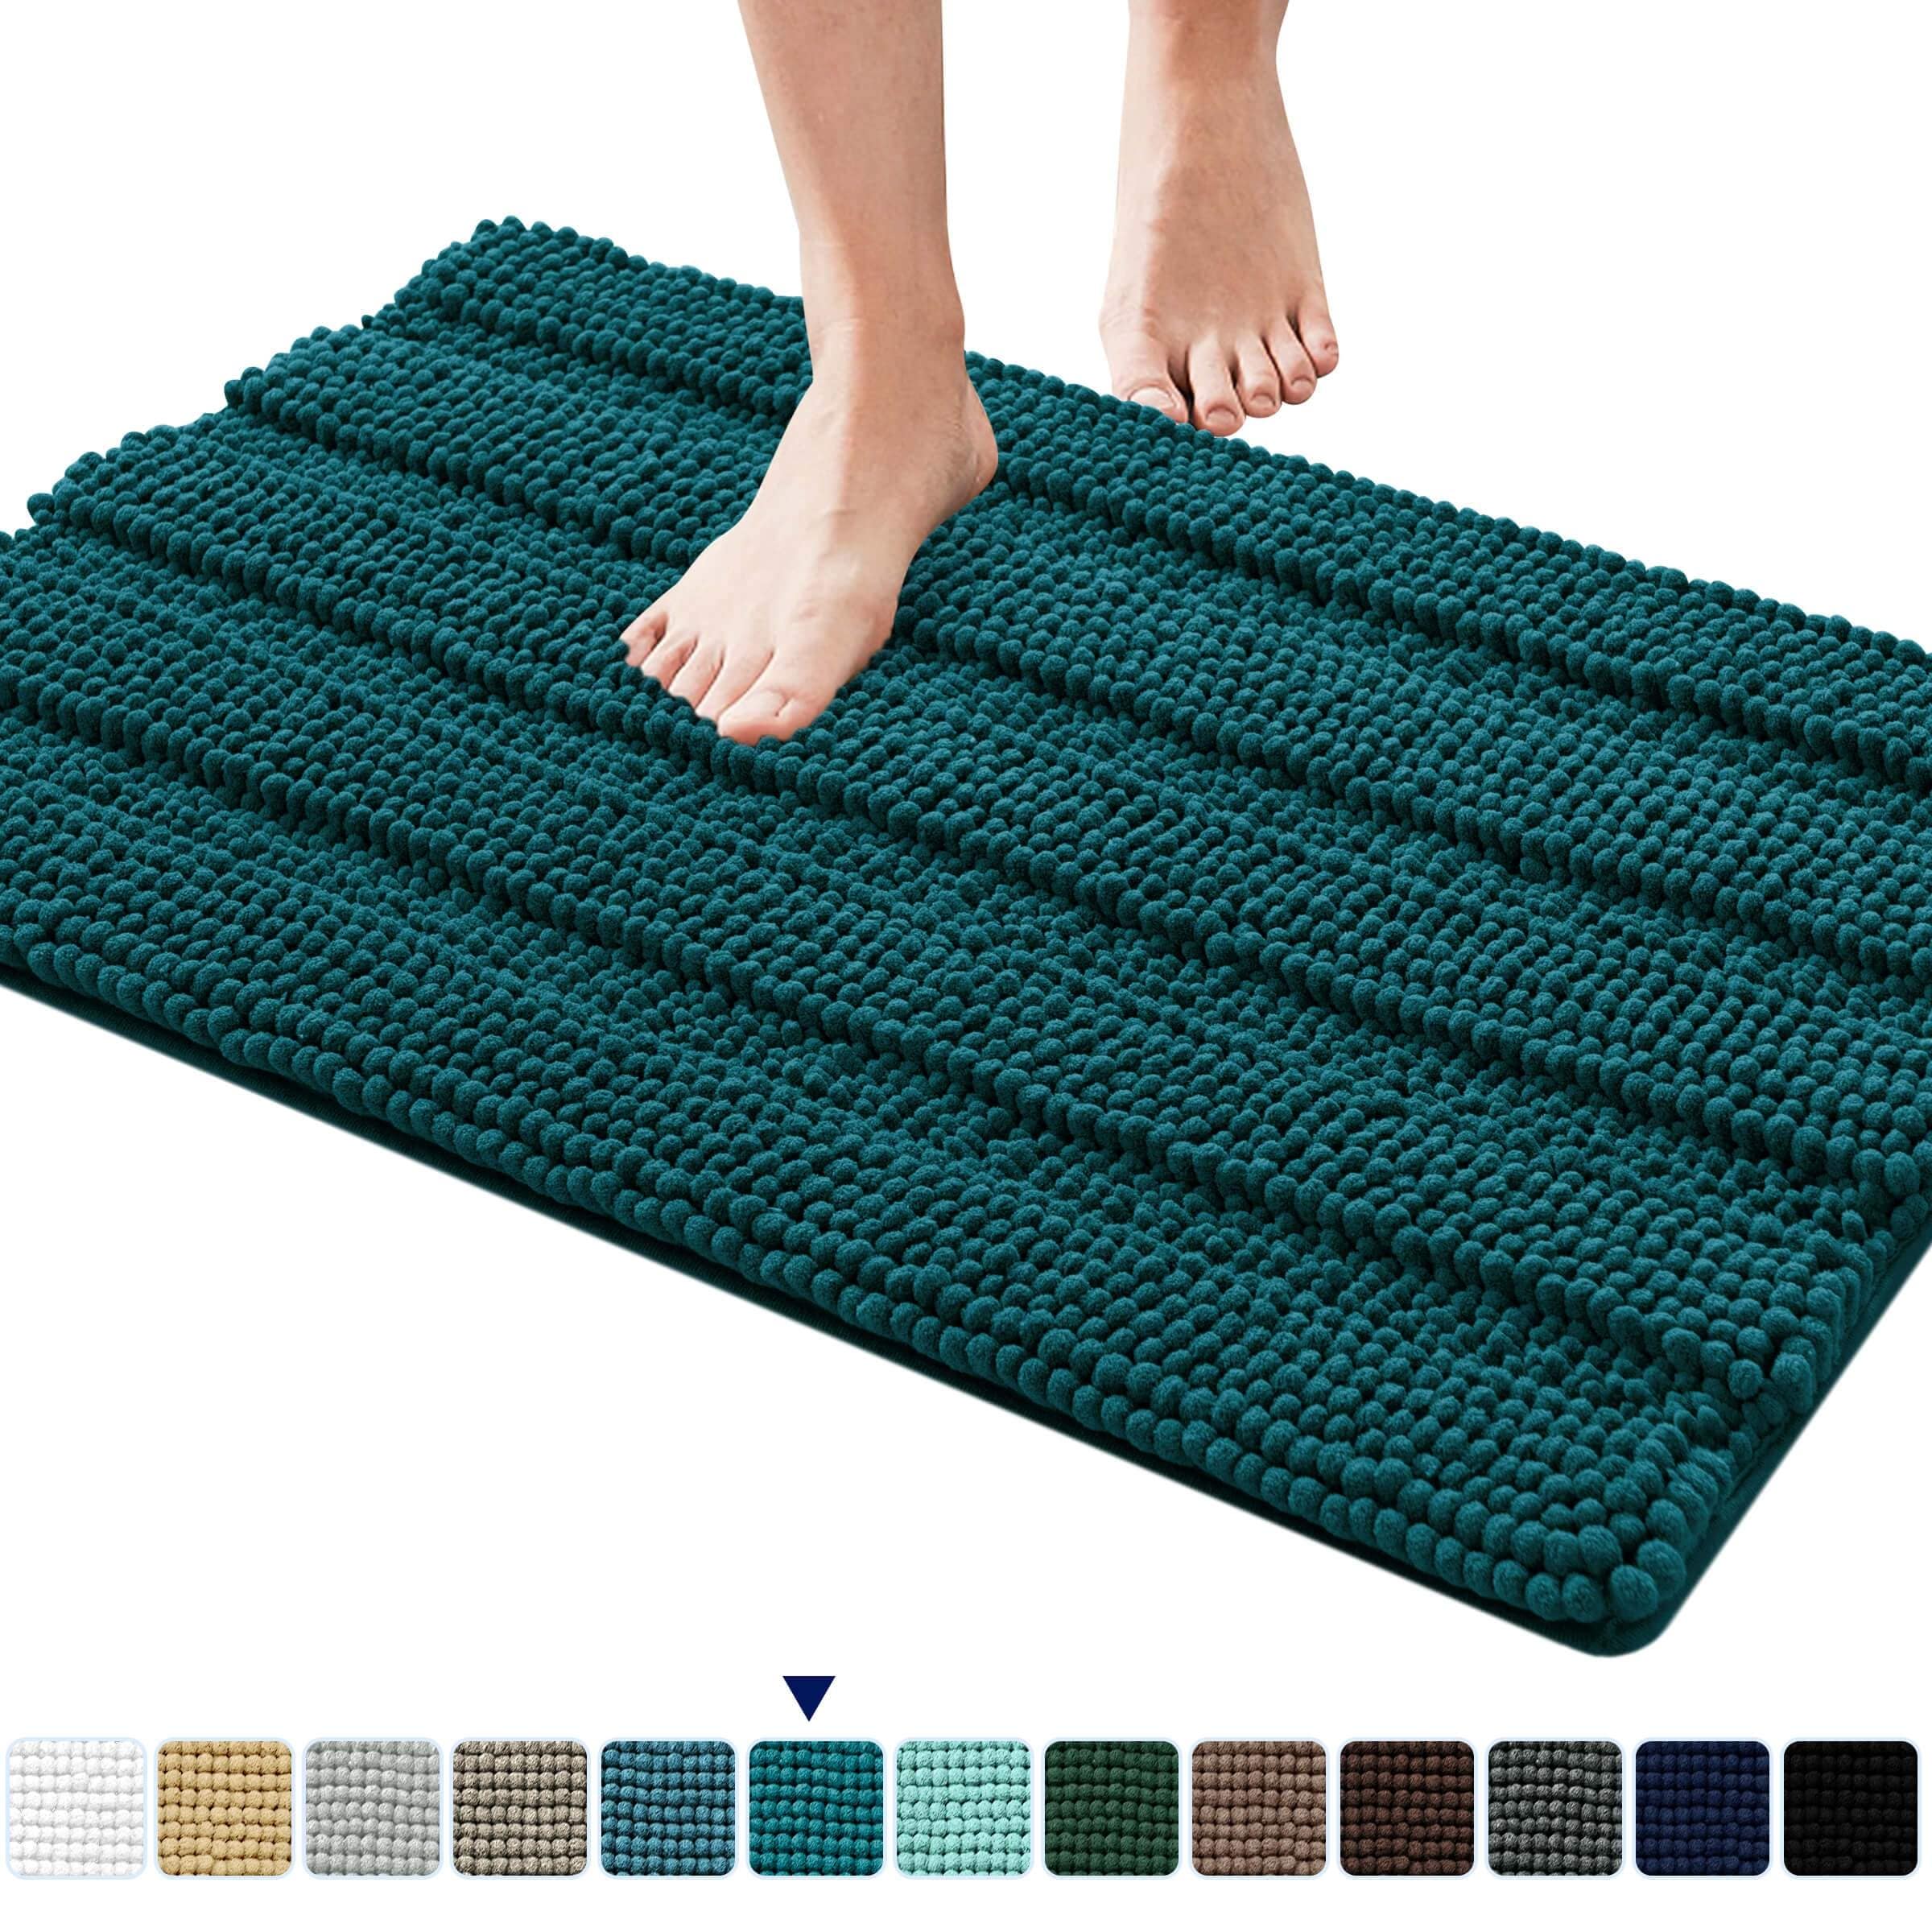 https://ak1.ostkcdn.com/images/products/is/images/direct/0d8568798eb773ff5b0d53b2787b614c3ef4cfcc/Subrtex-Supersoft-and-Absorbent-Braided-Bathroom-Rugs-Chenille-Bath-Rugs.jpg